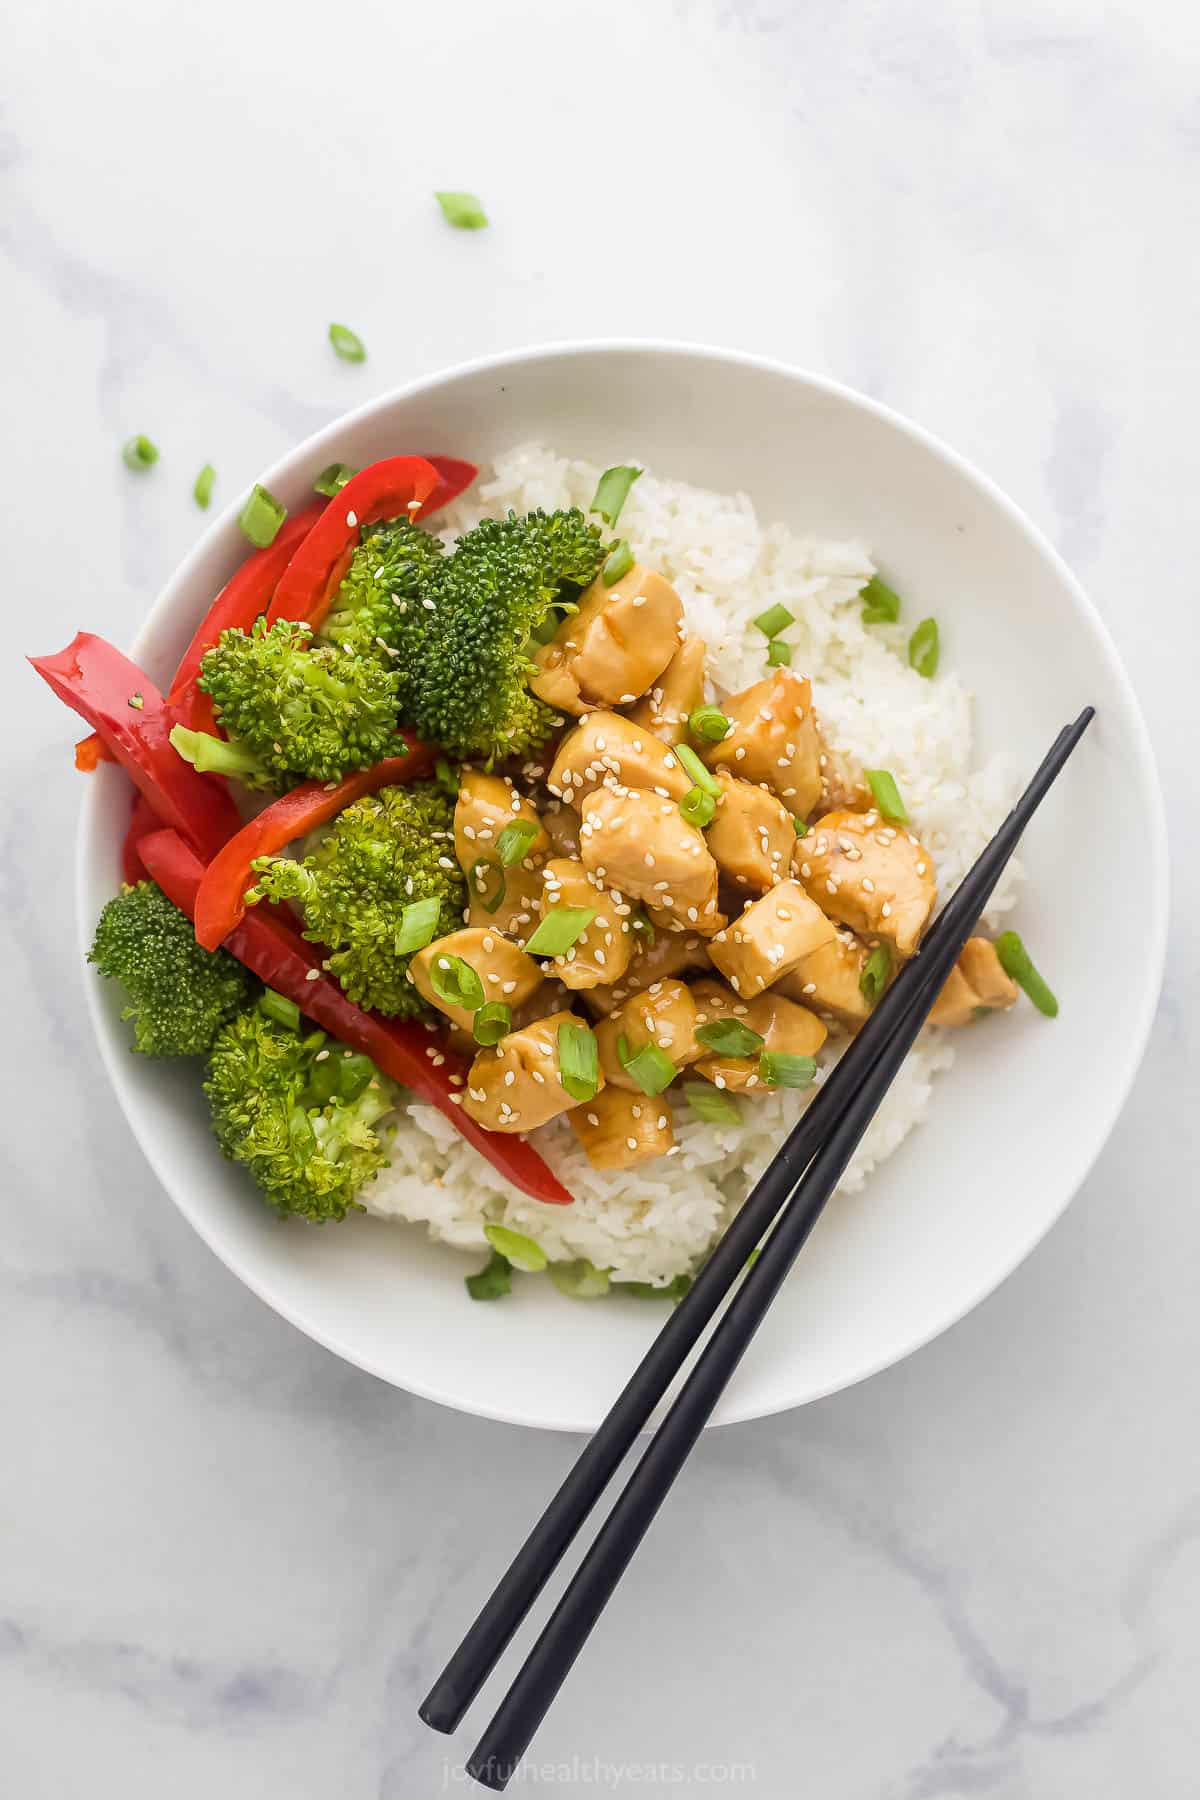 teriyaki chicken bowl with broccoli and red peppers